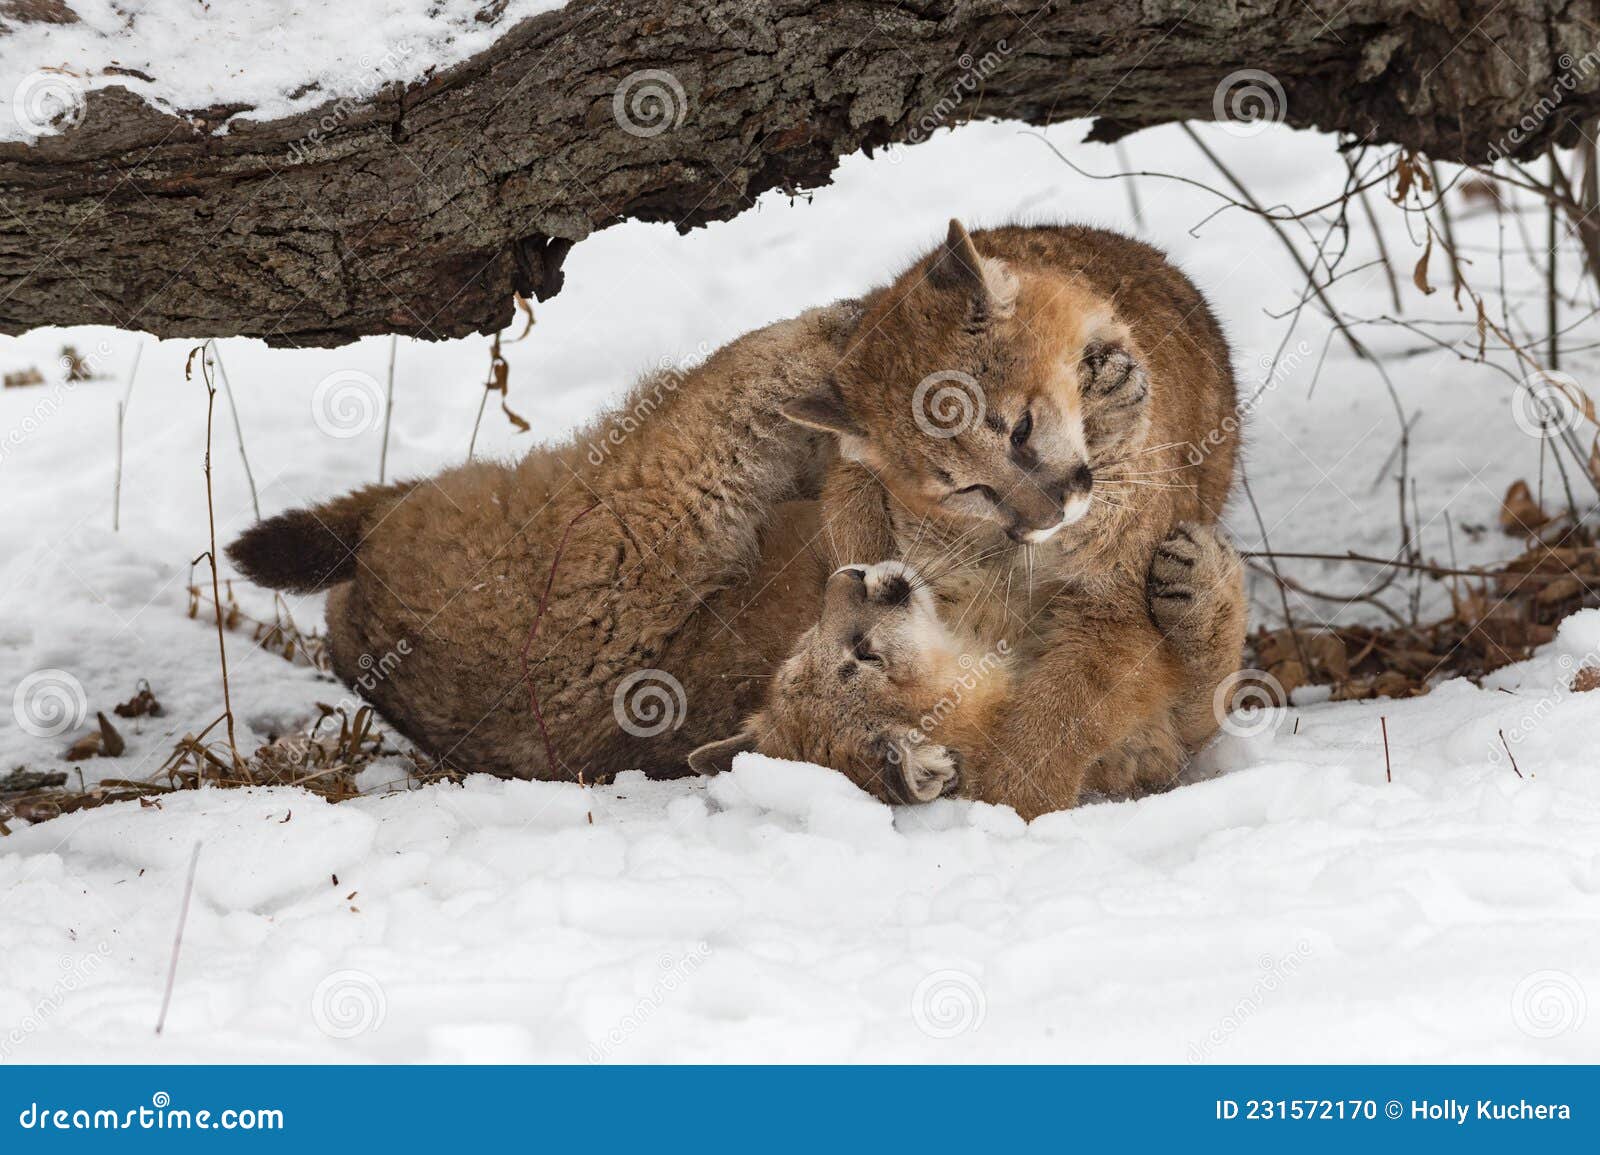 female cougars puma concolor wrestle together in snow winter